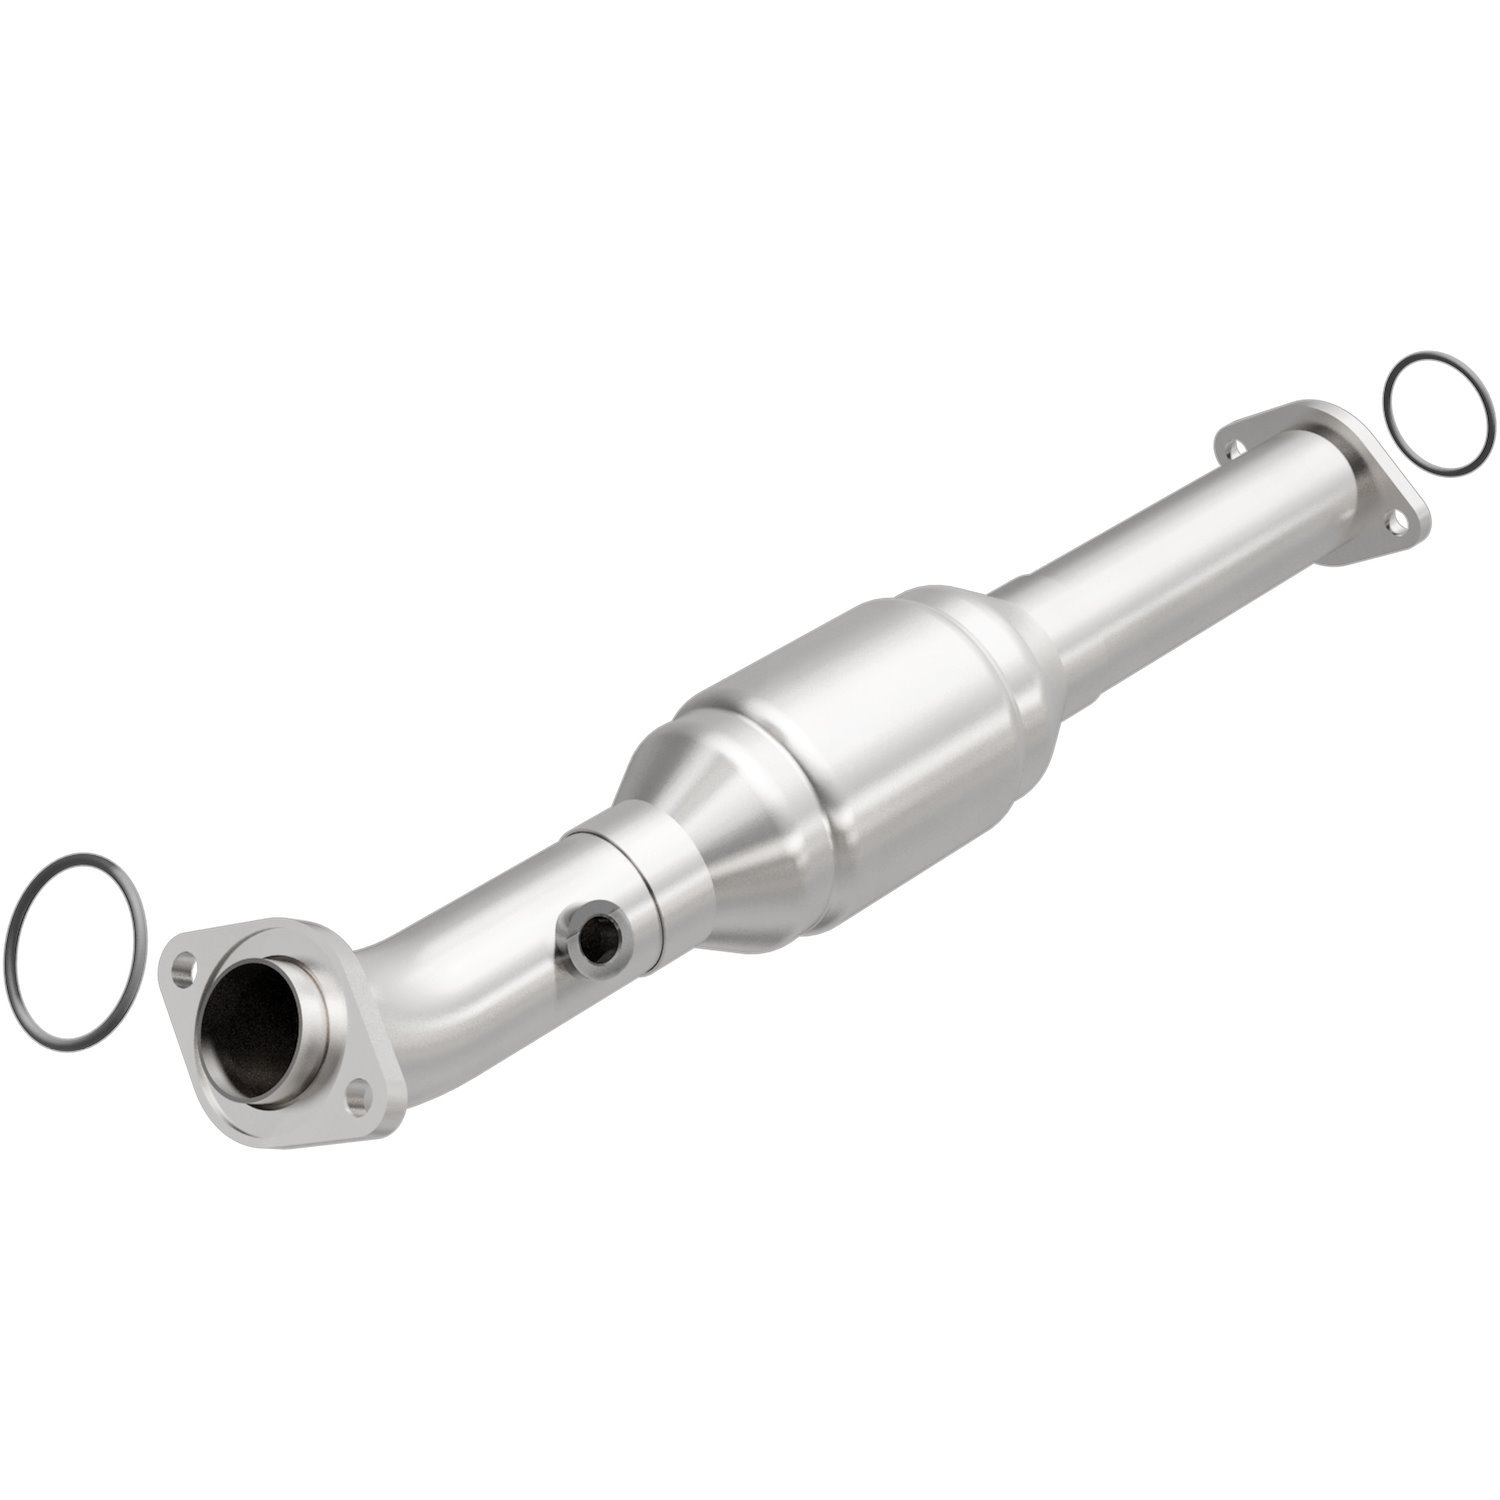 2005-2015 Toyota Tacoma HM Grade Federal / EPA Compliant Direct-Fit Catalytic Converter